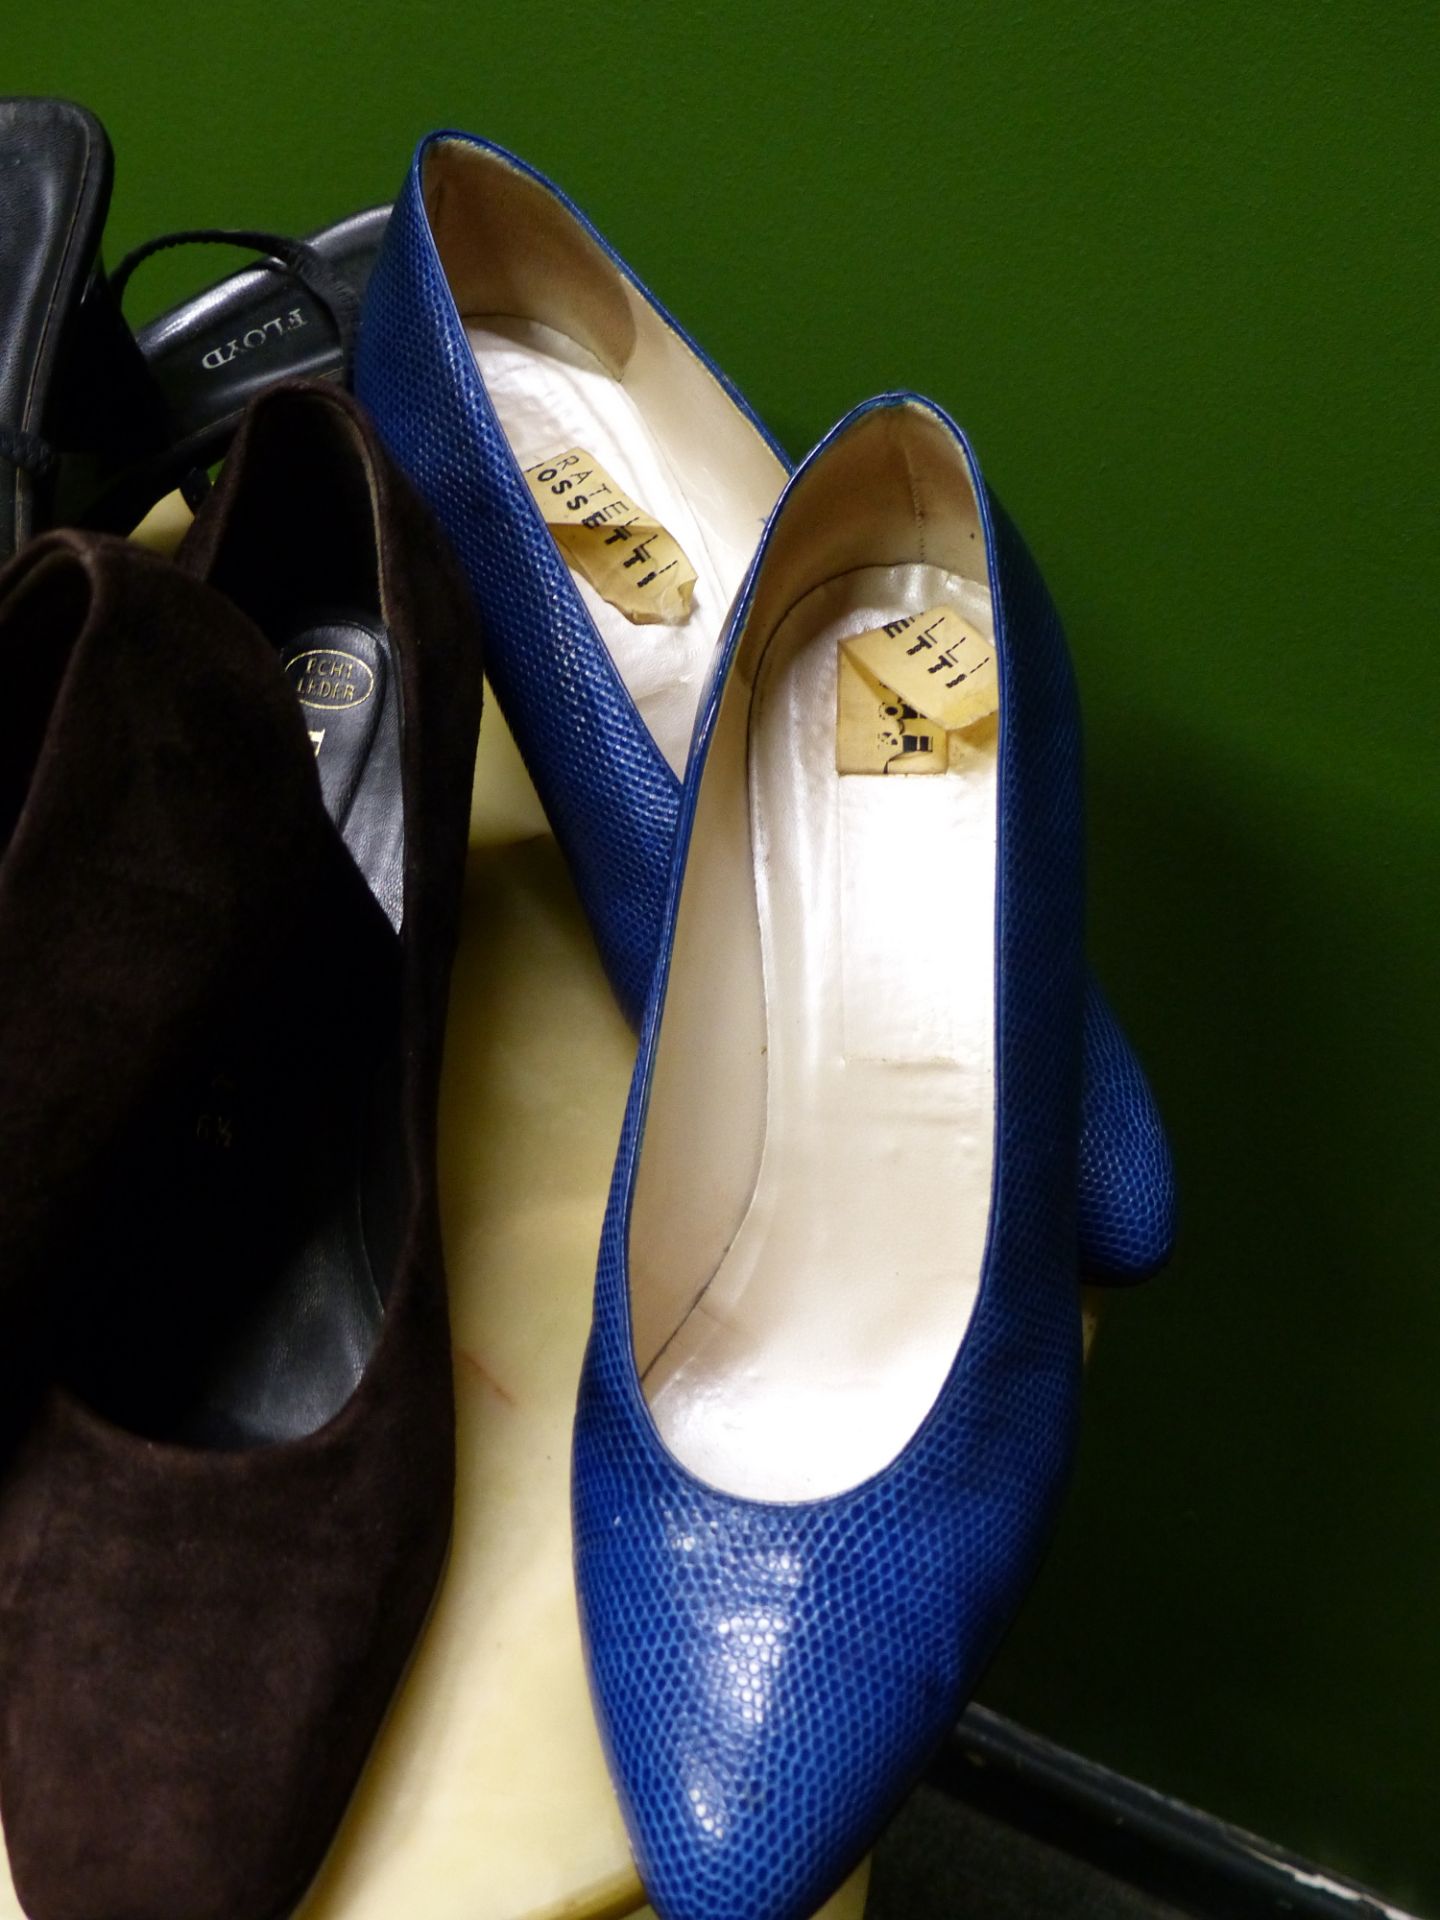 SHOES. FRATELL ROSSETTI BLUE CROC STYLE EUR SIZE 39.5, TOGETHER WITH PETER KAISER CAFE SUEDE UK SIZE - Image 4 of 12